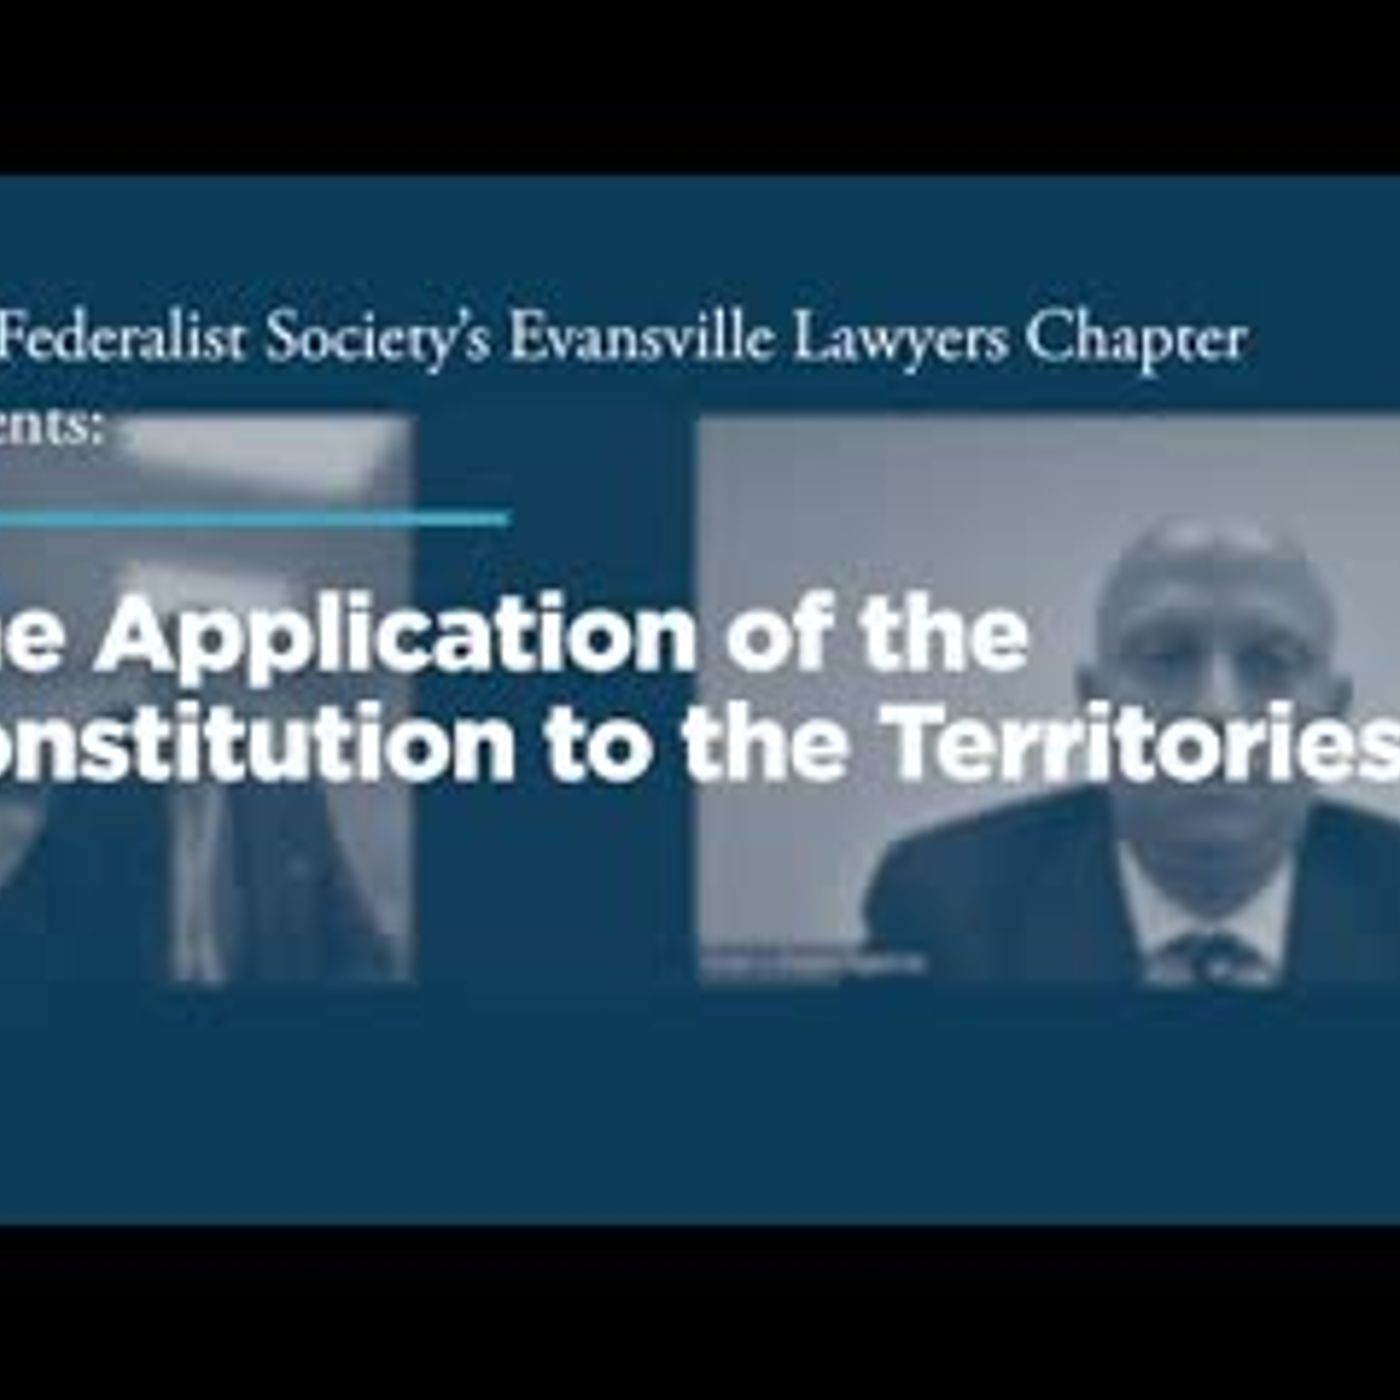 The Application of the Constitution to the Territories